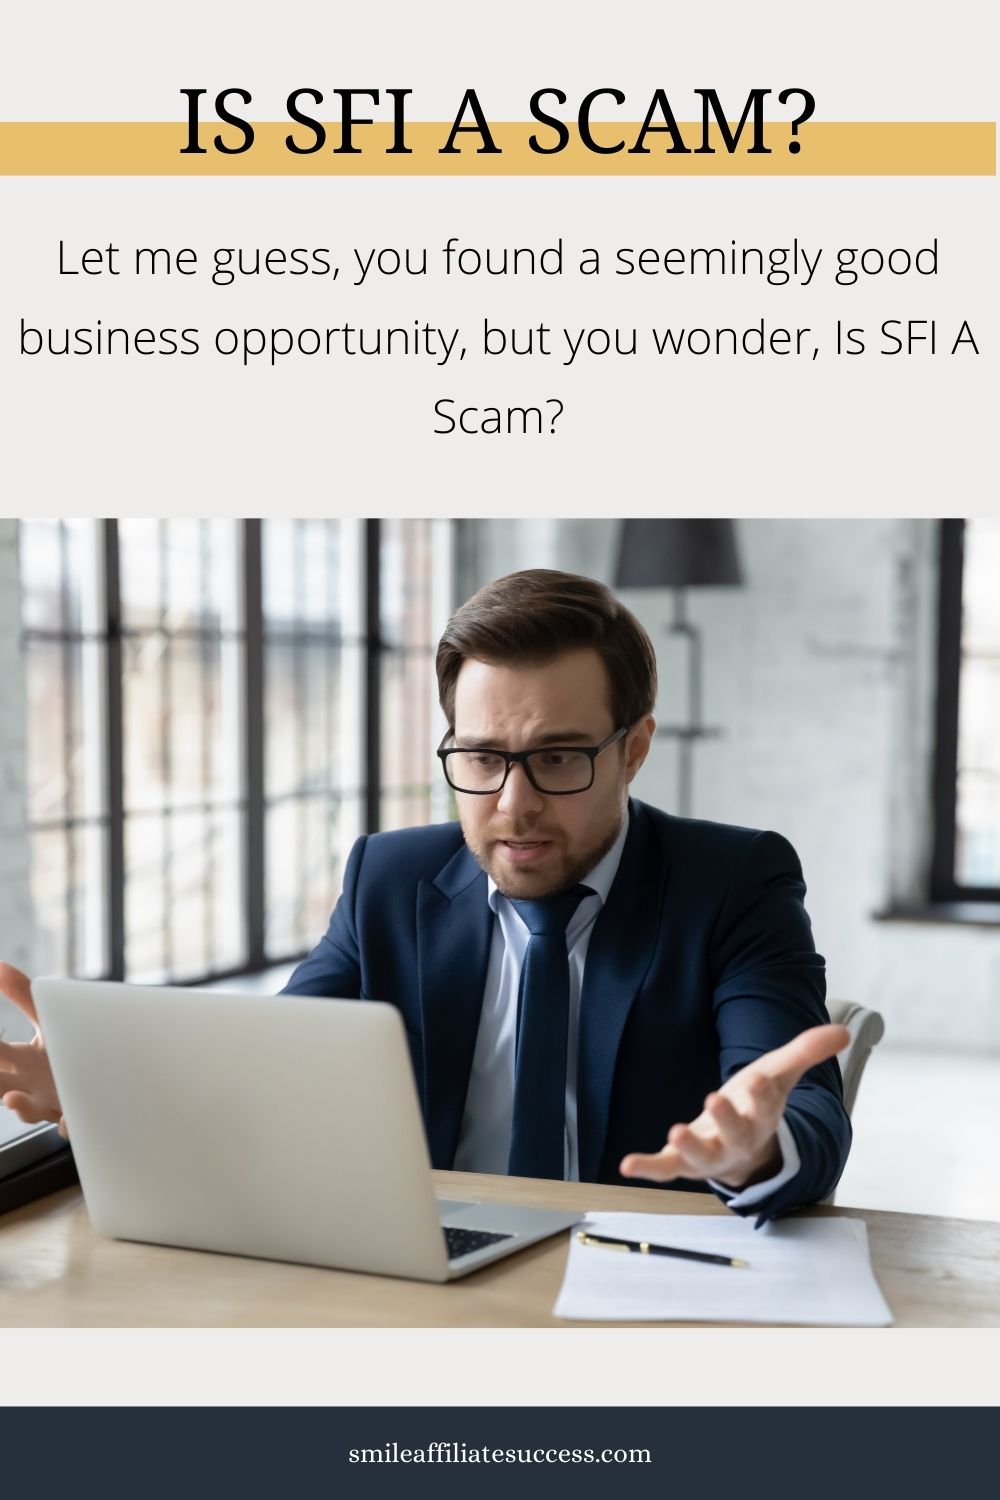 Is SFI A Scam?